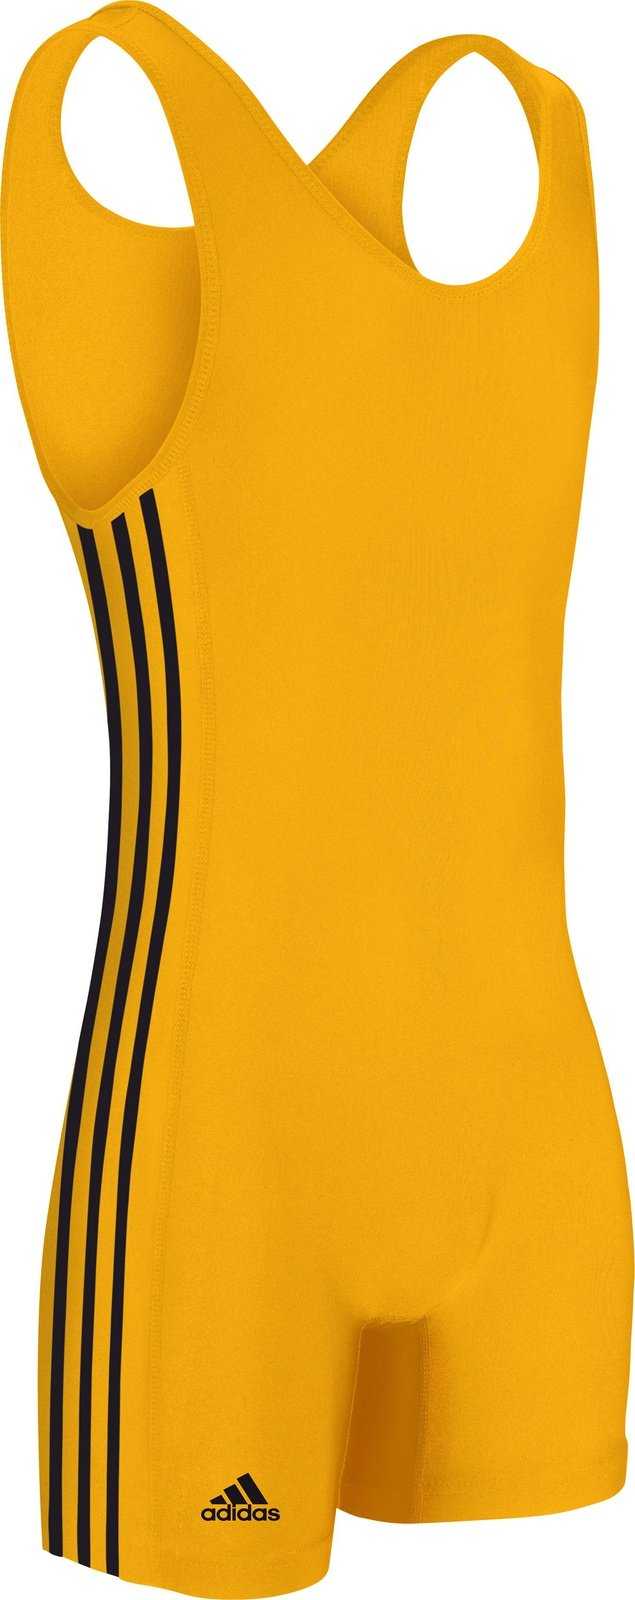 Adidas aS102s 3 Stripe Wrestling Singlet - Athletic Gold Black - HIT a Double